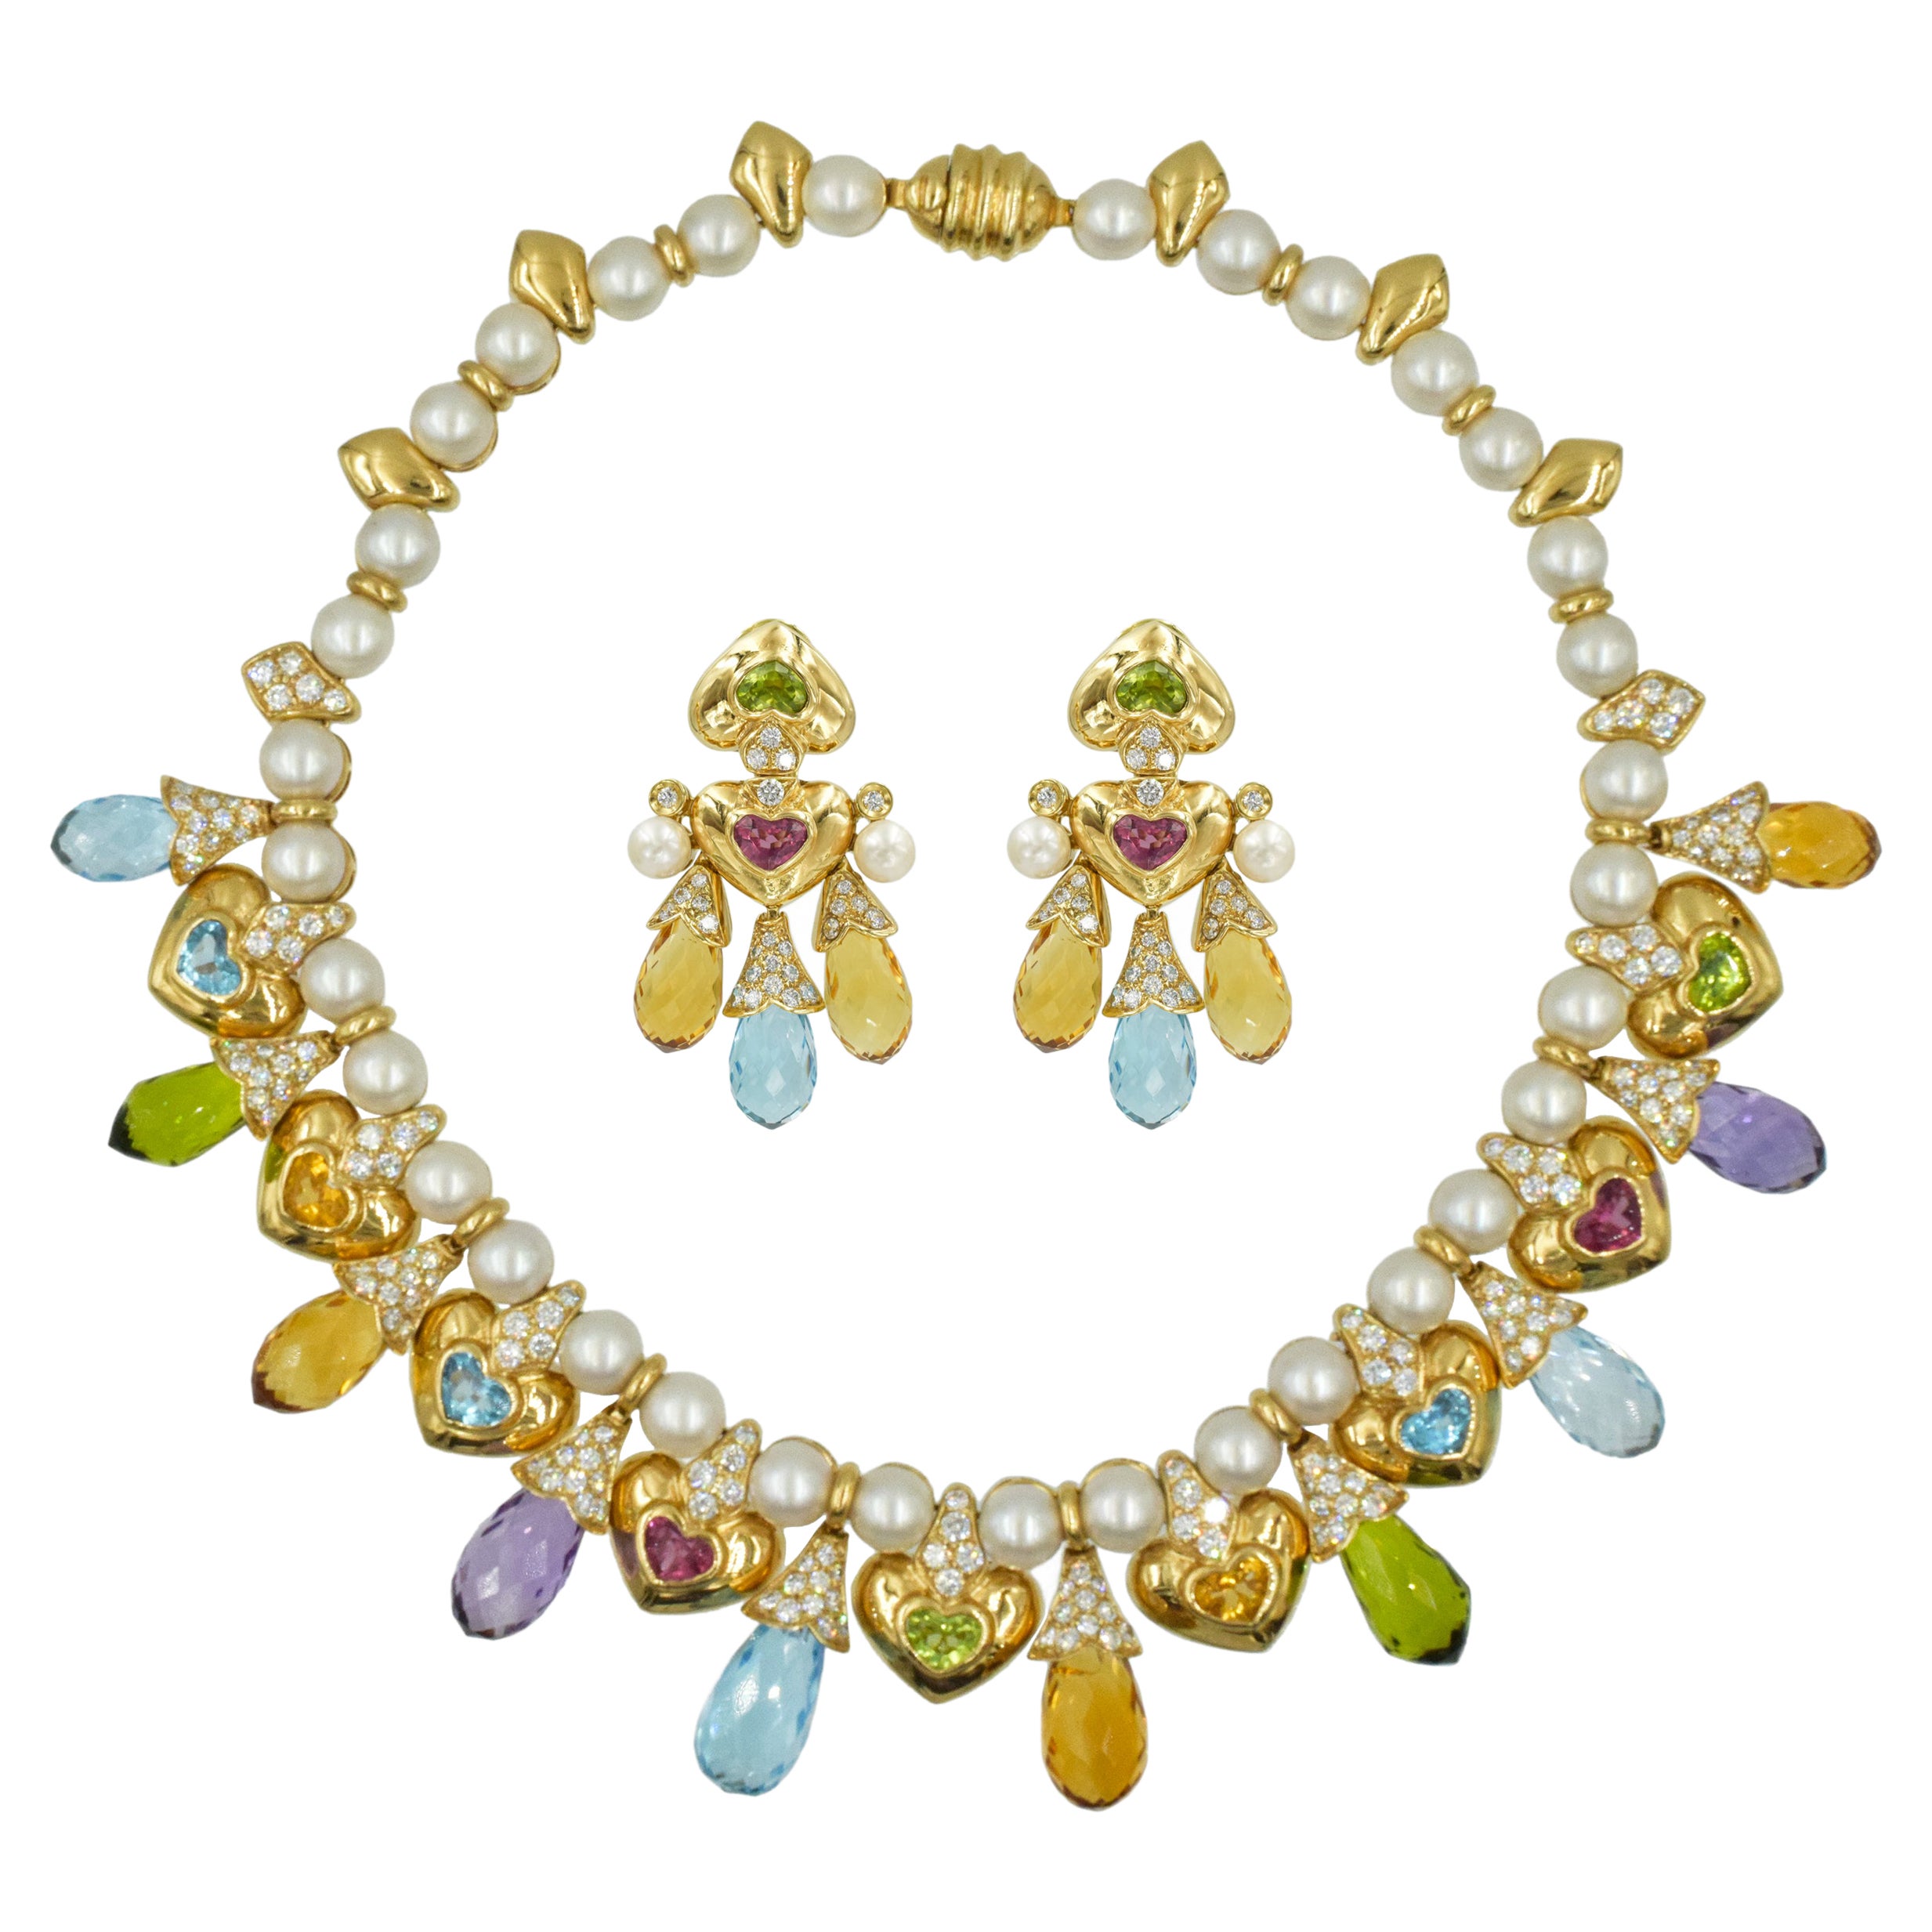 Moussaieff Pearl, Damond and Gemstone Necklace and Earring Set in 18k